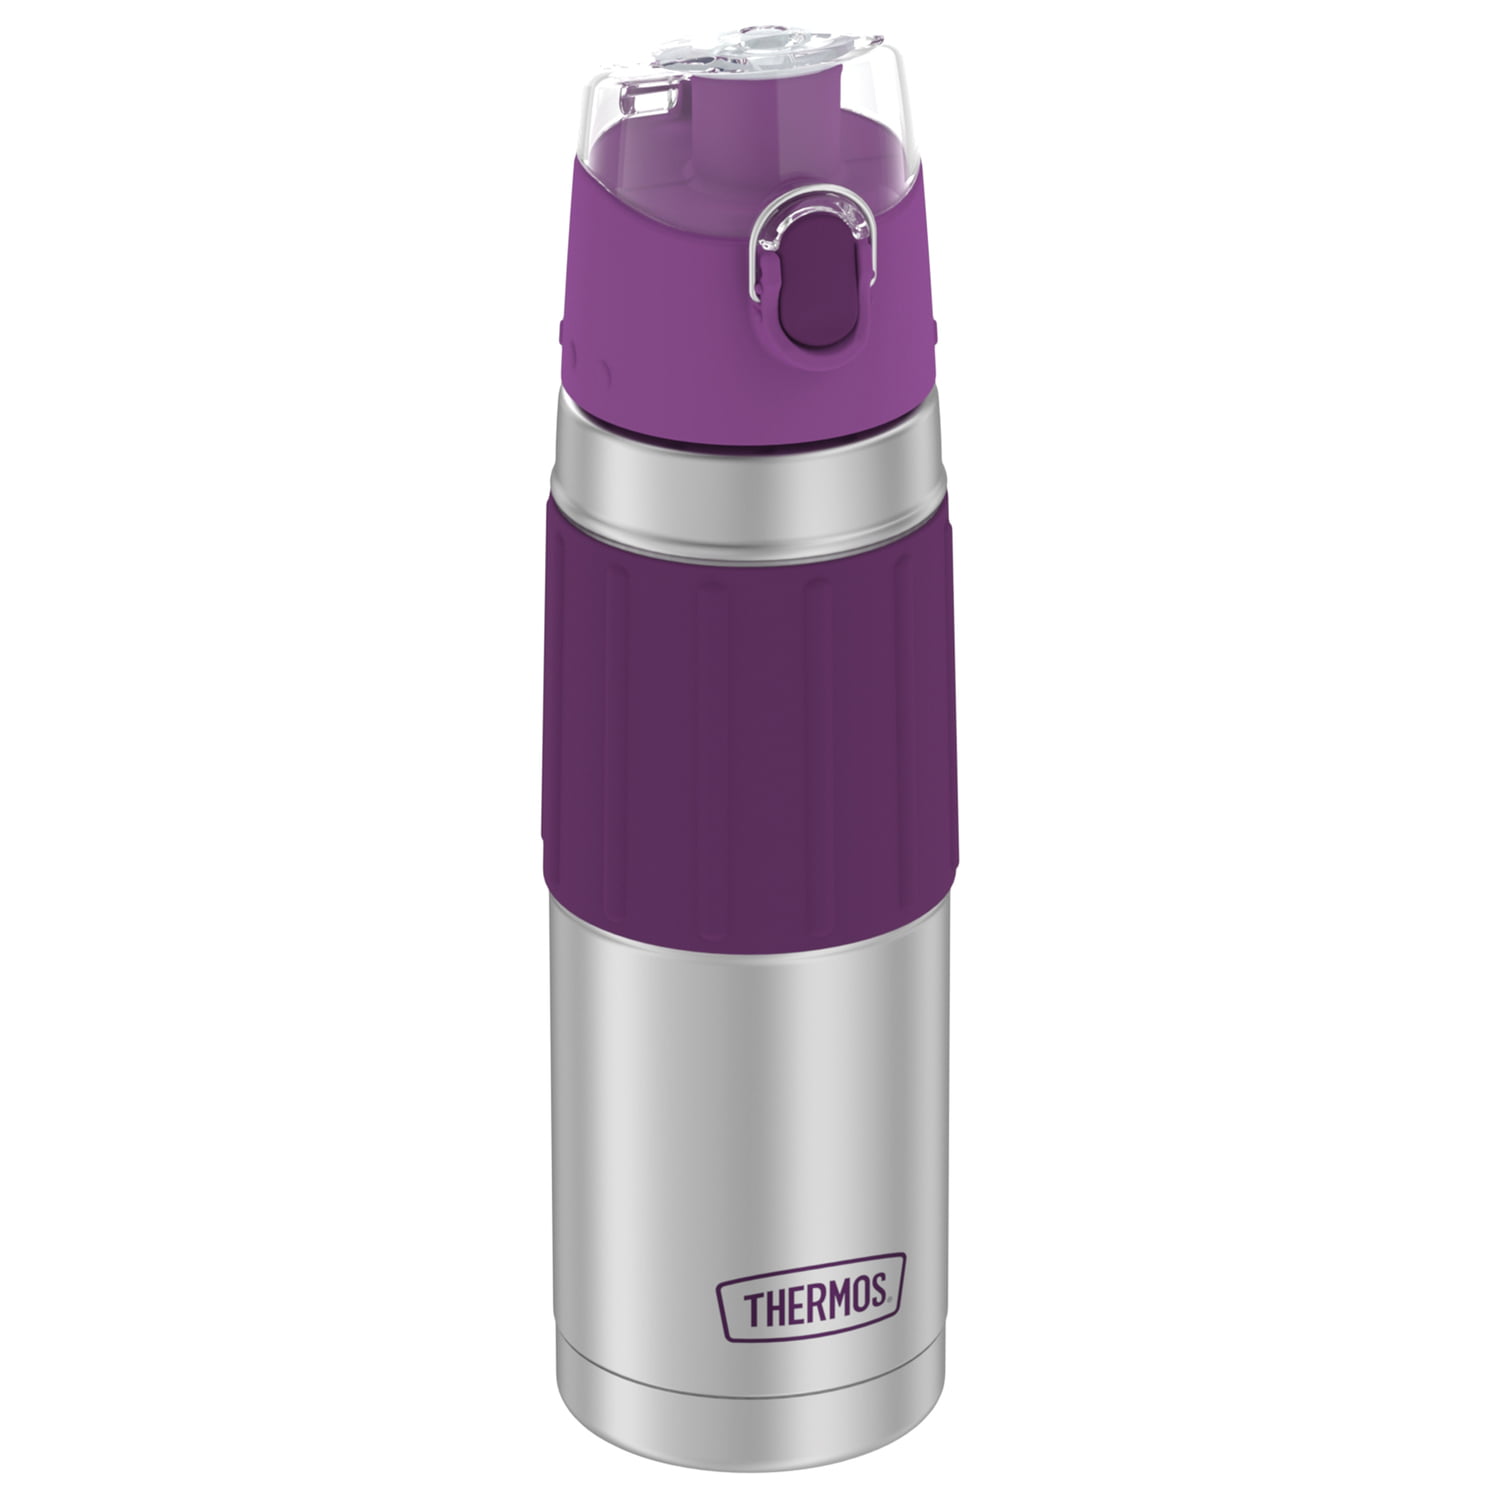 Thermos 2465ssp6 18-Ounce Vacuum-Insulated Stainless Steel Hydration Bottle (deep Purple)